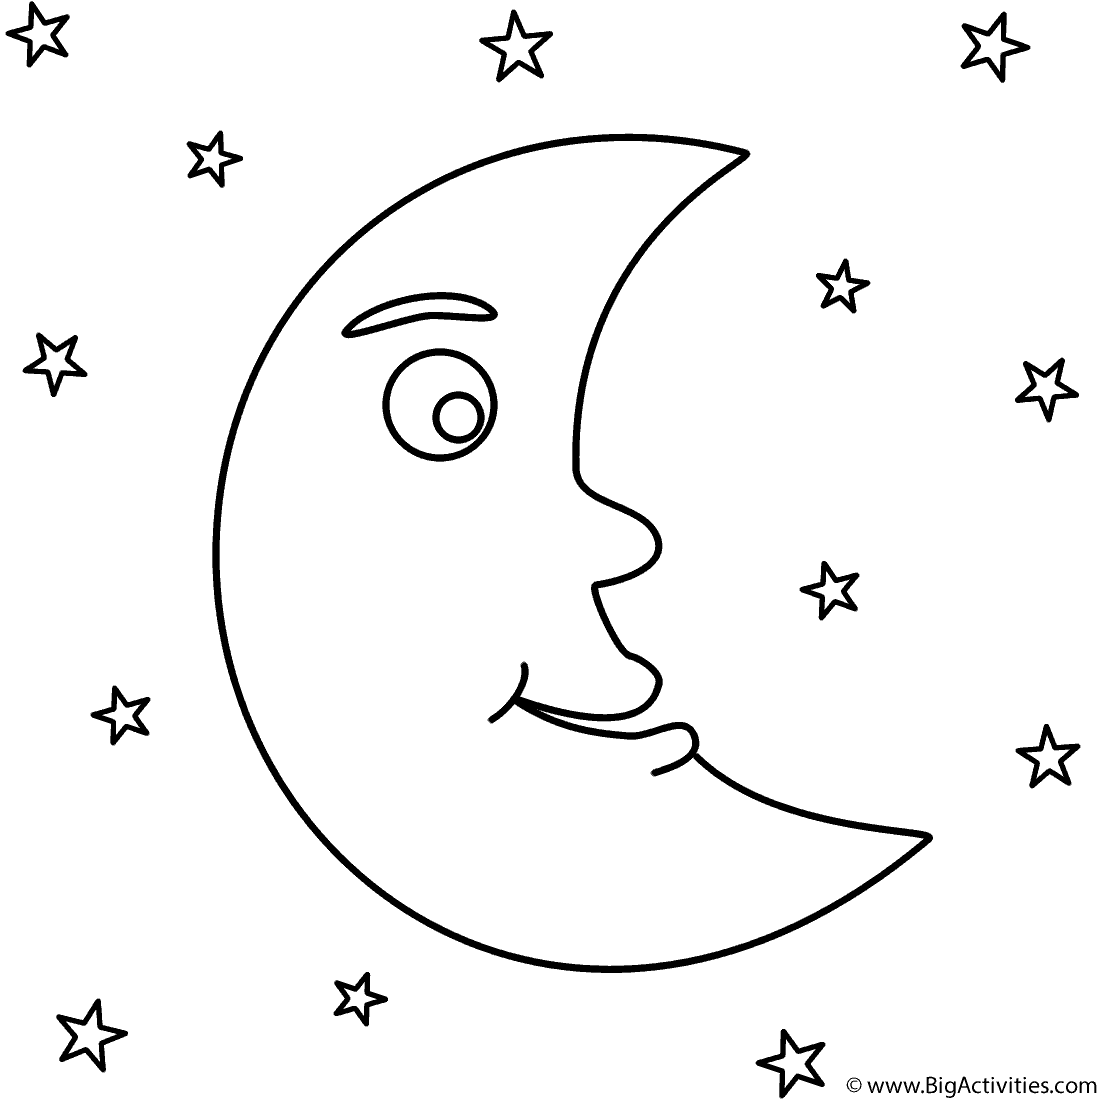 crescent moon coloring page